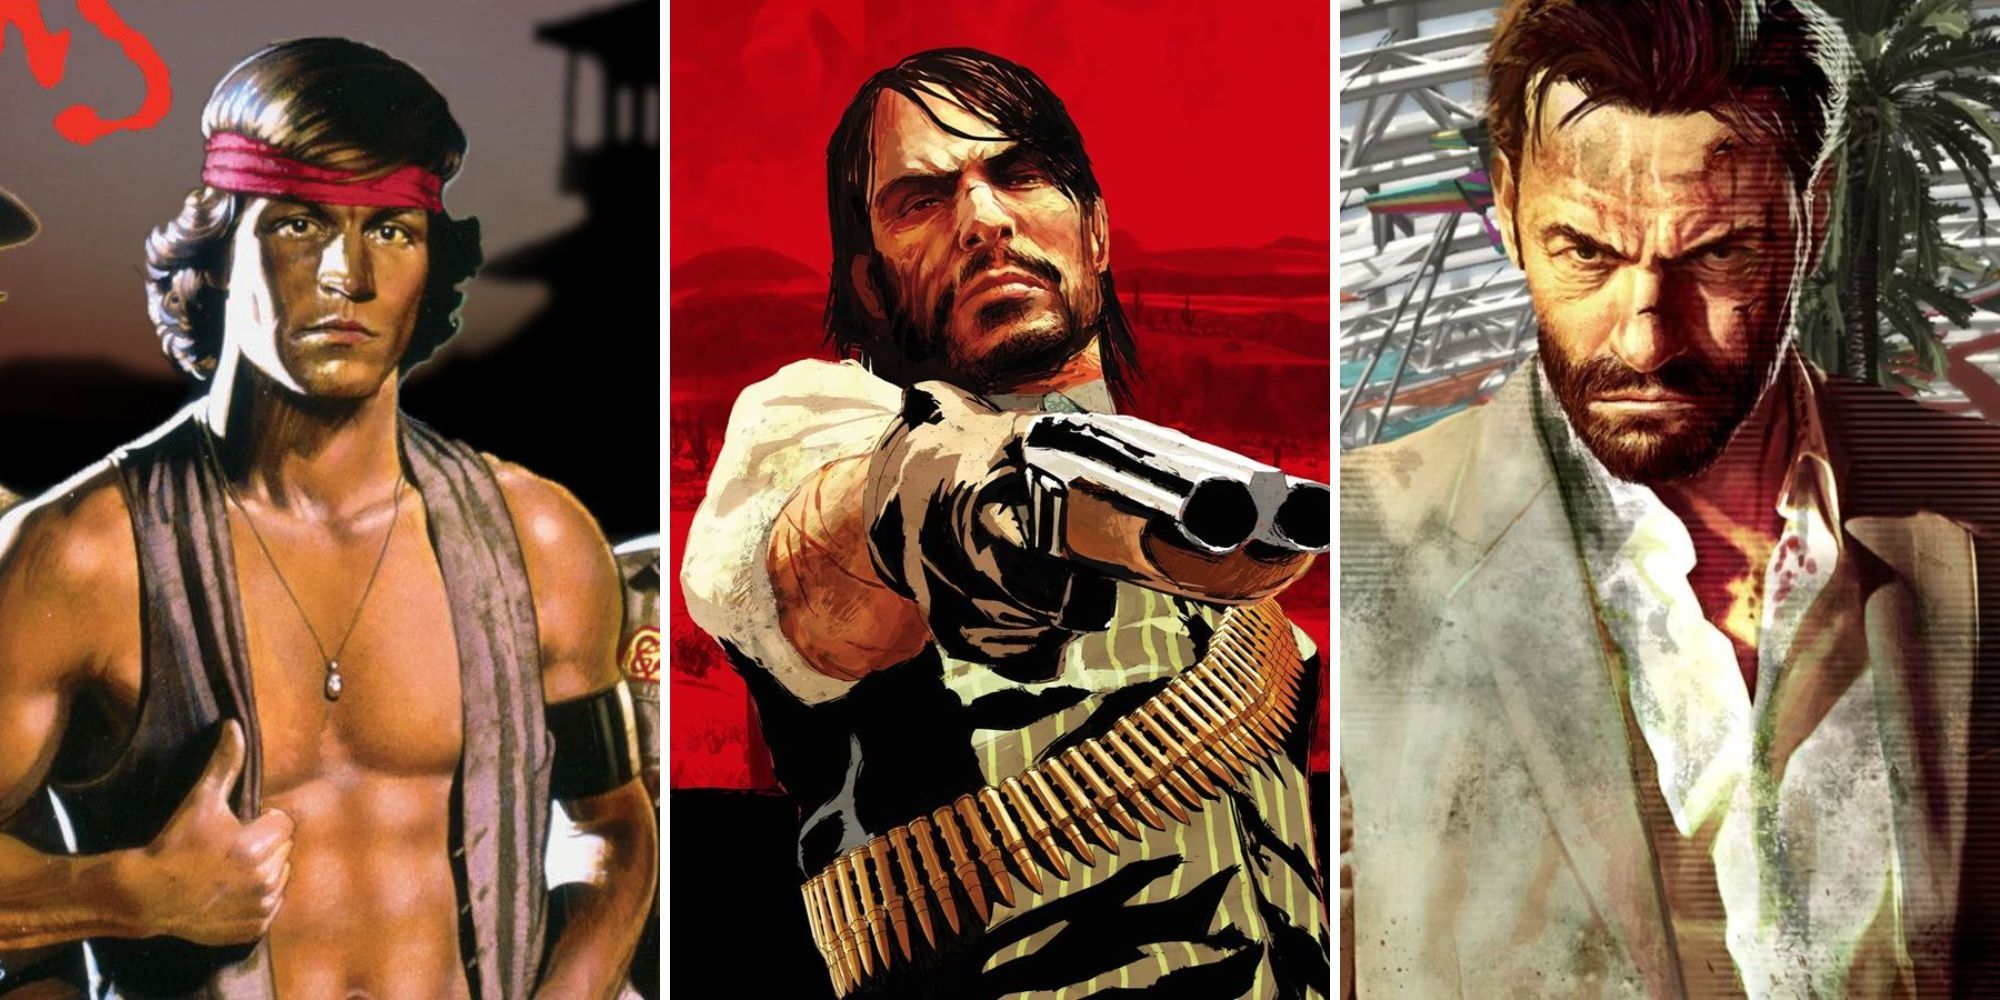 A grid of the Rockstar Games The Warriors, Red Dead Redemption, & Max Payne 3